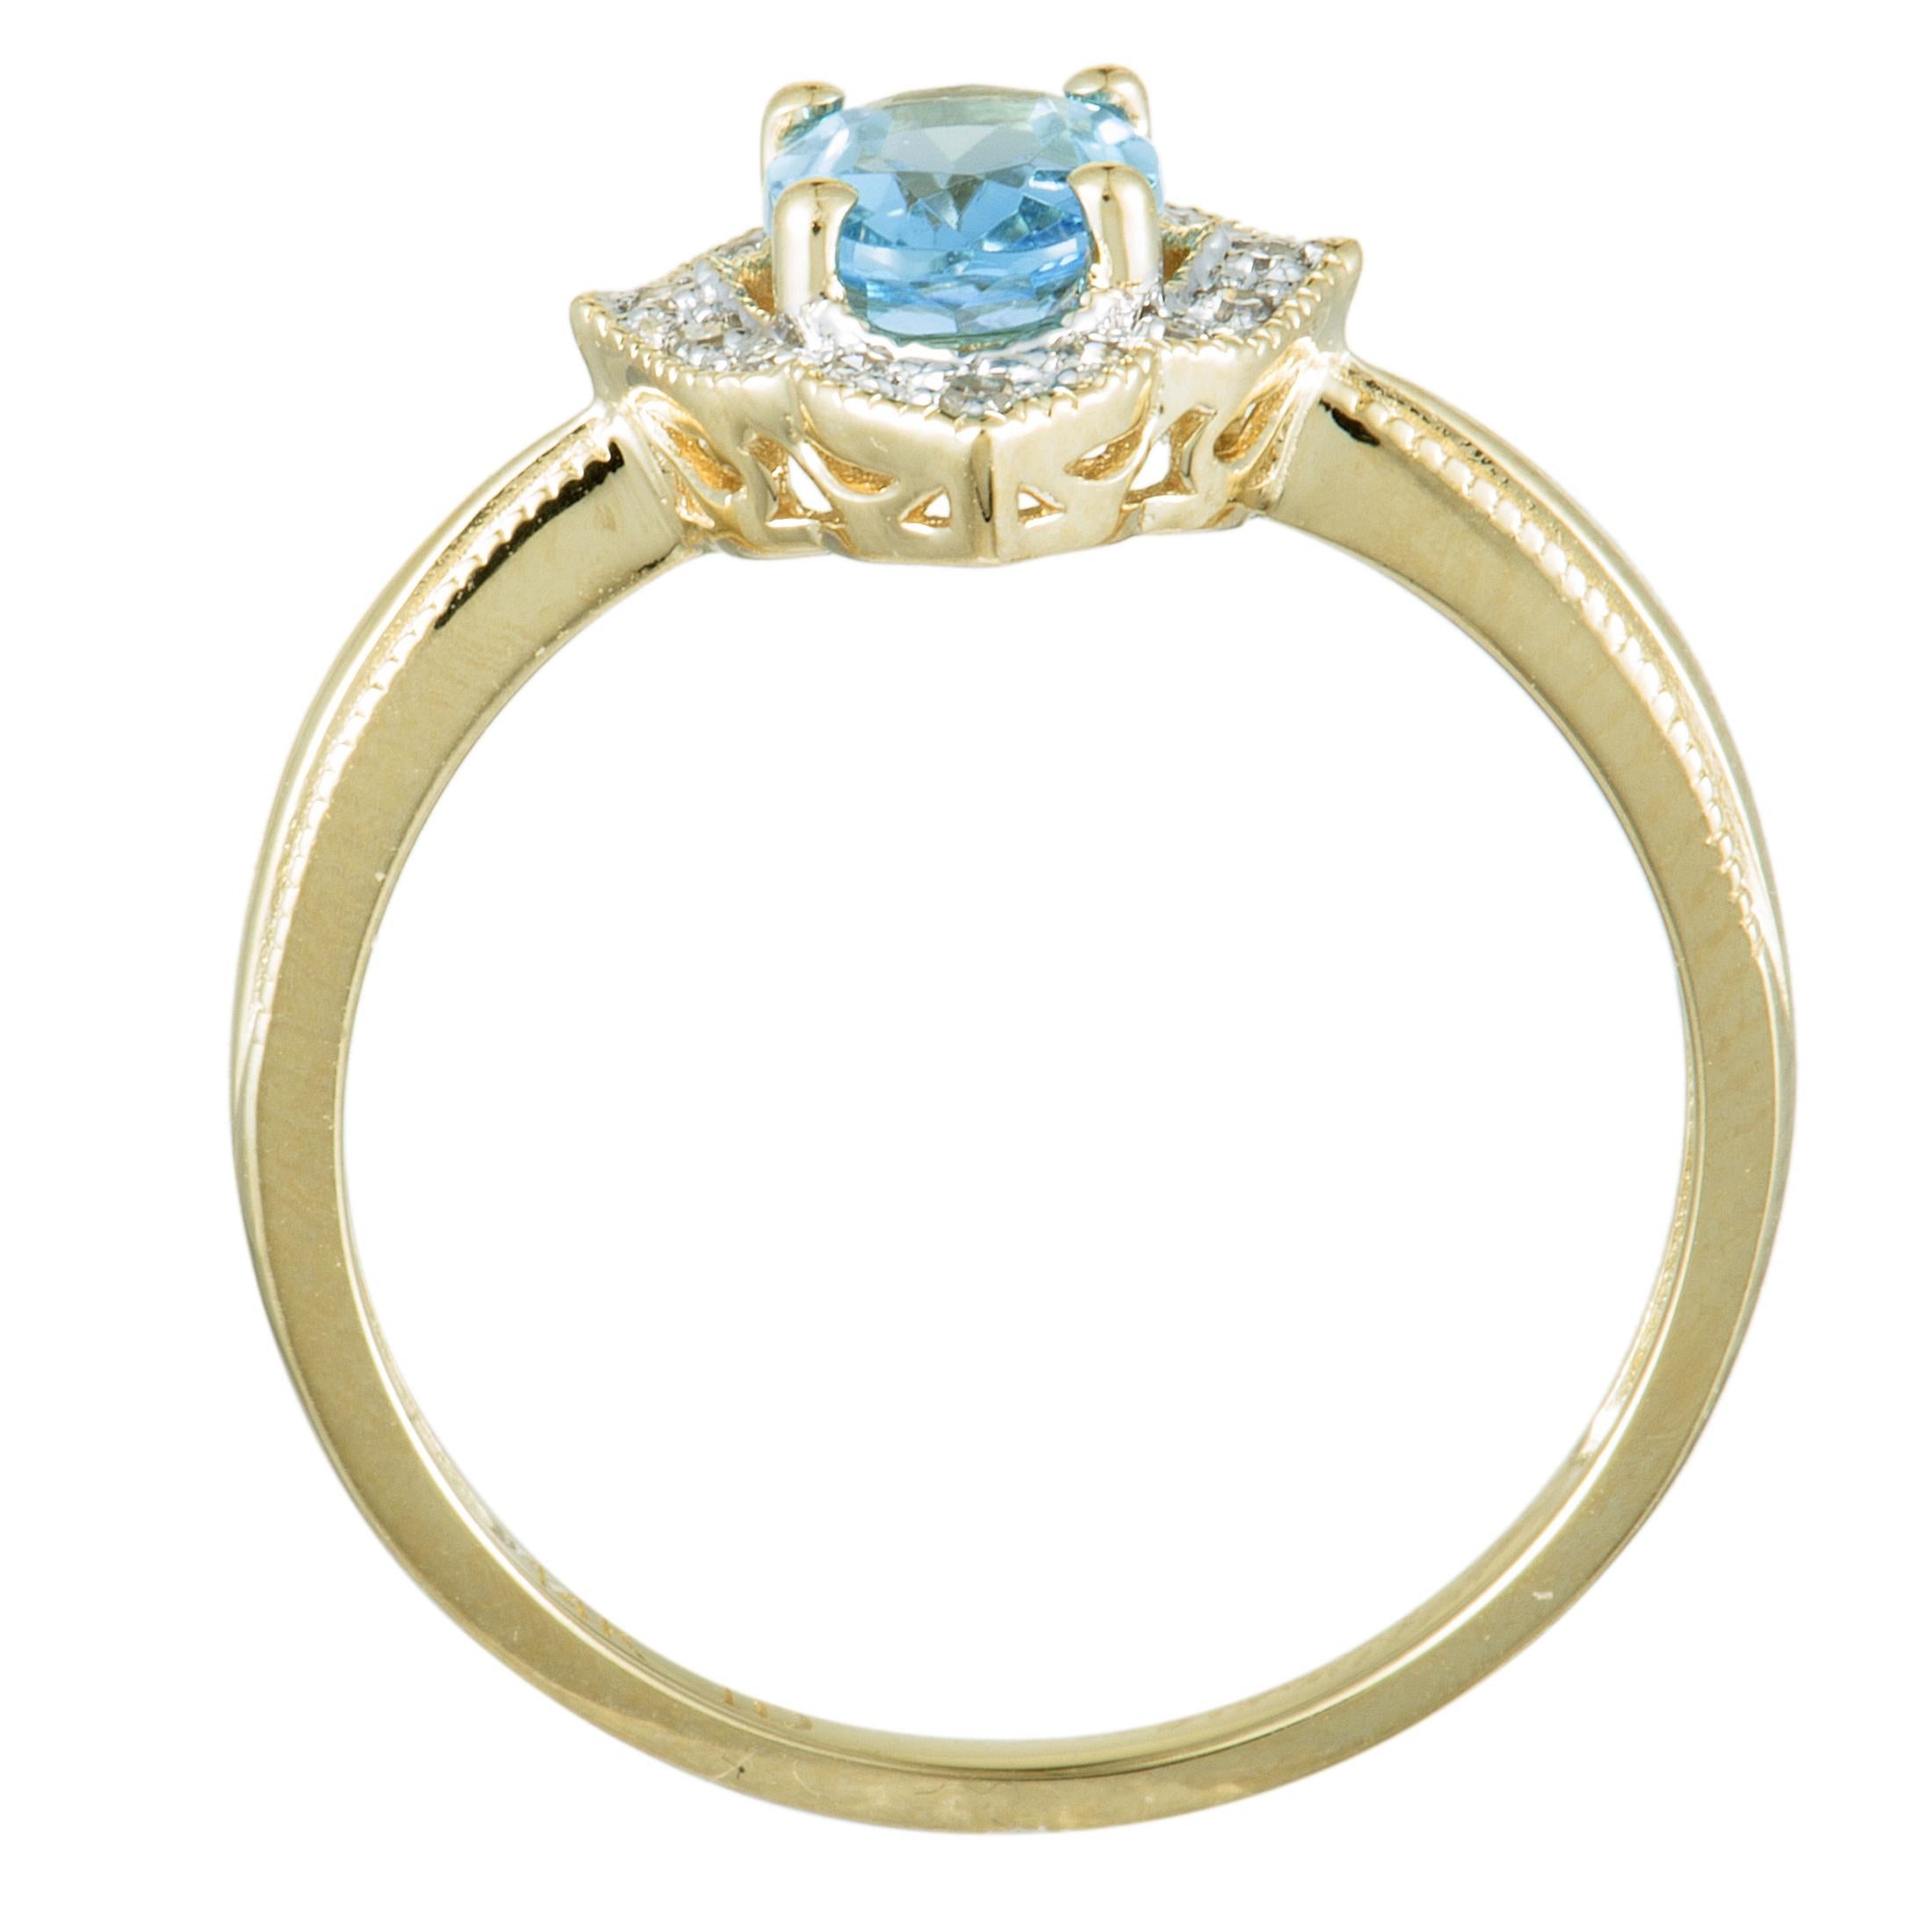 Creating an attractive contrast with the brightly gleaming gold and diamonds, the enticing topaz gives an intriguing aesthetic twist to this wonderful jewelry piece that is designed in a splendidly classic fashion. The ring is beautifully crafted